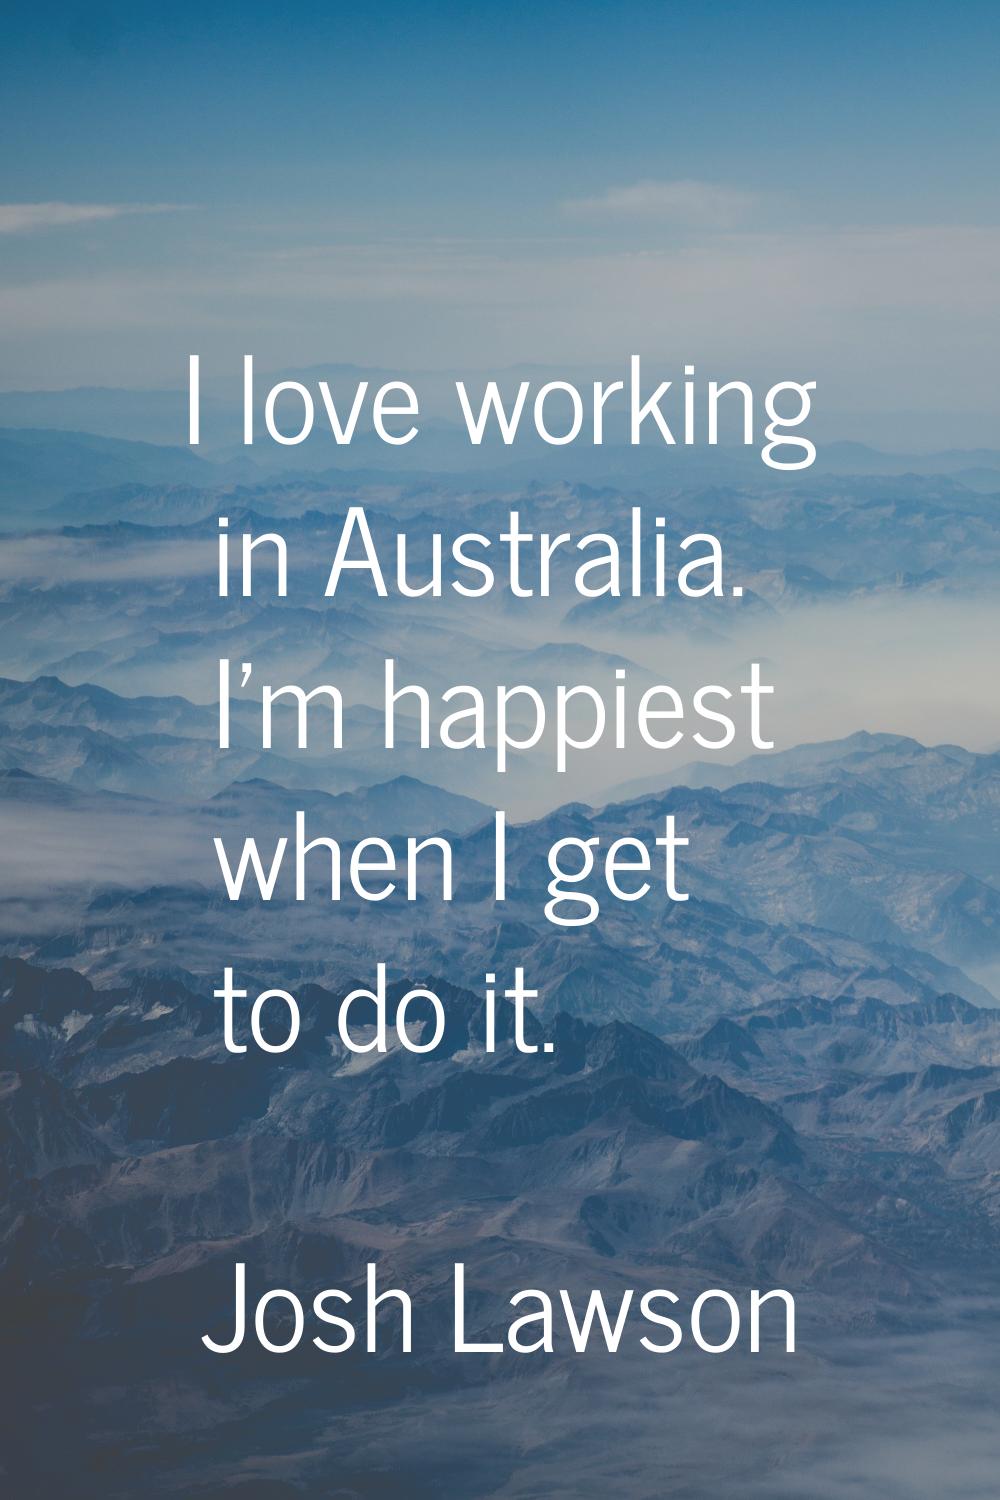 I love working in Australia. I'm happiest when I get to do it.